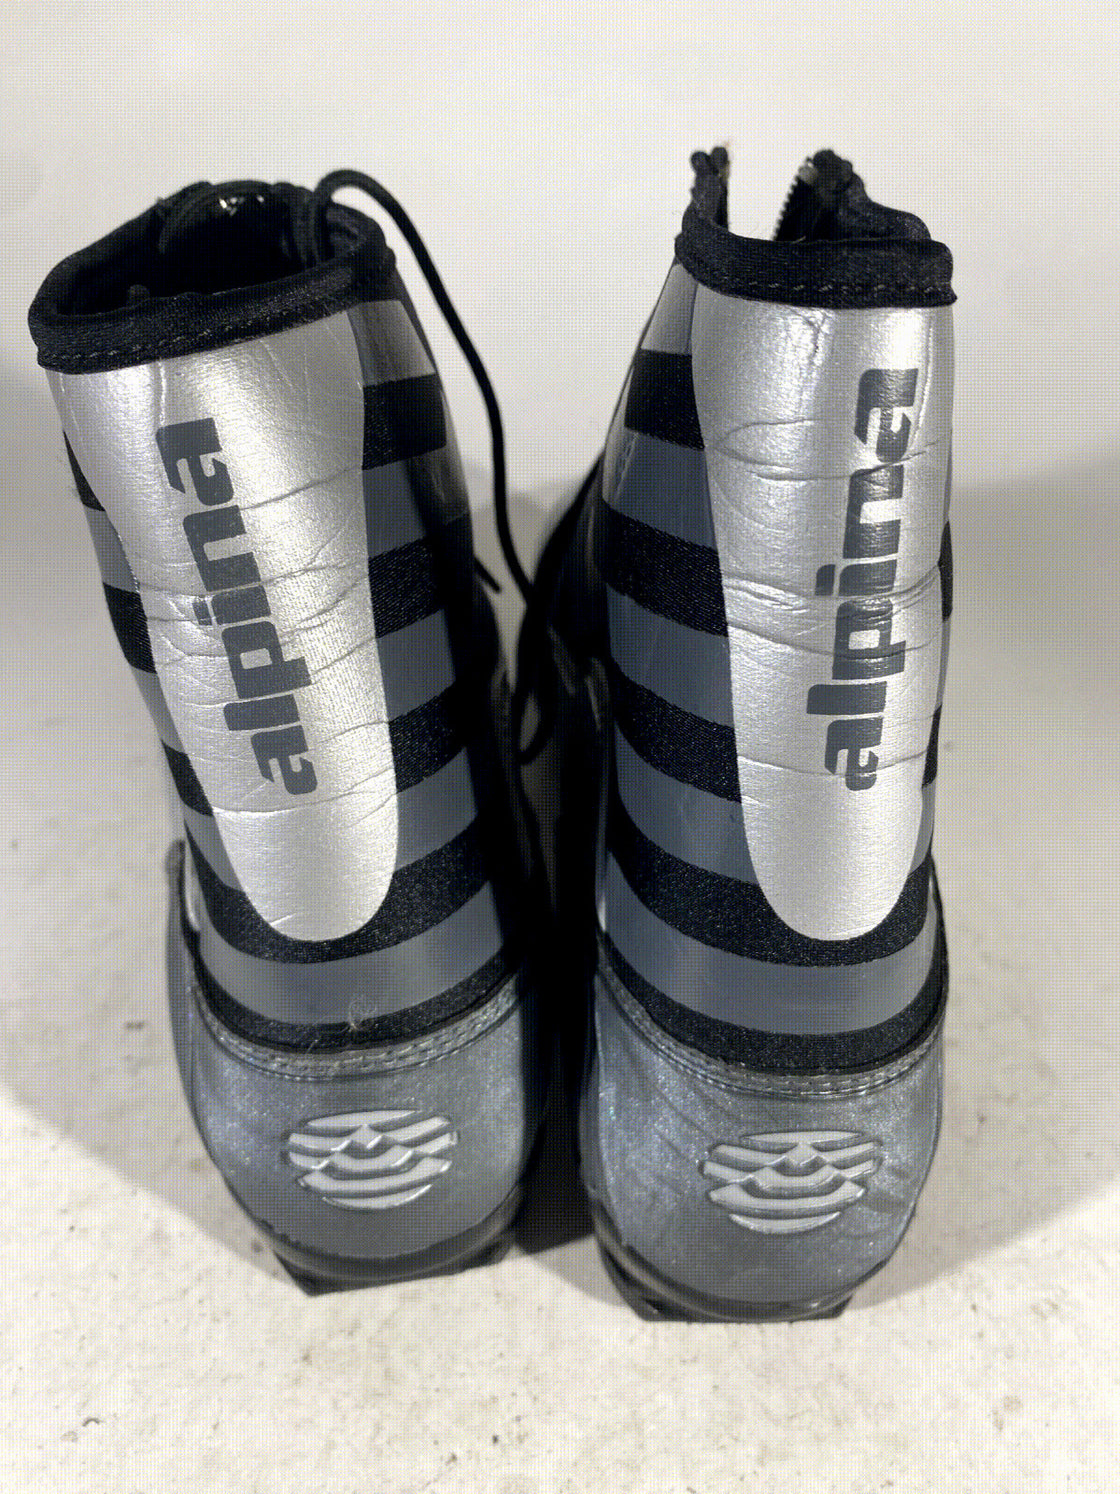 Alpina T10 Nordic Cross Country Ski Boots Size EU46 US12 for NNN